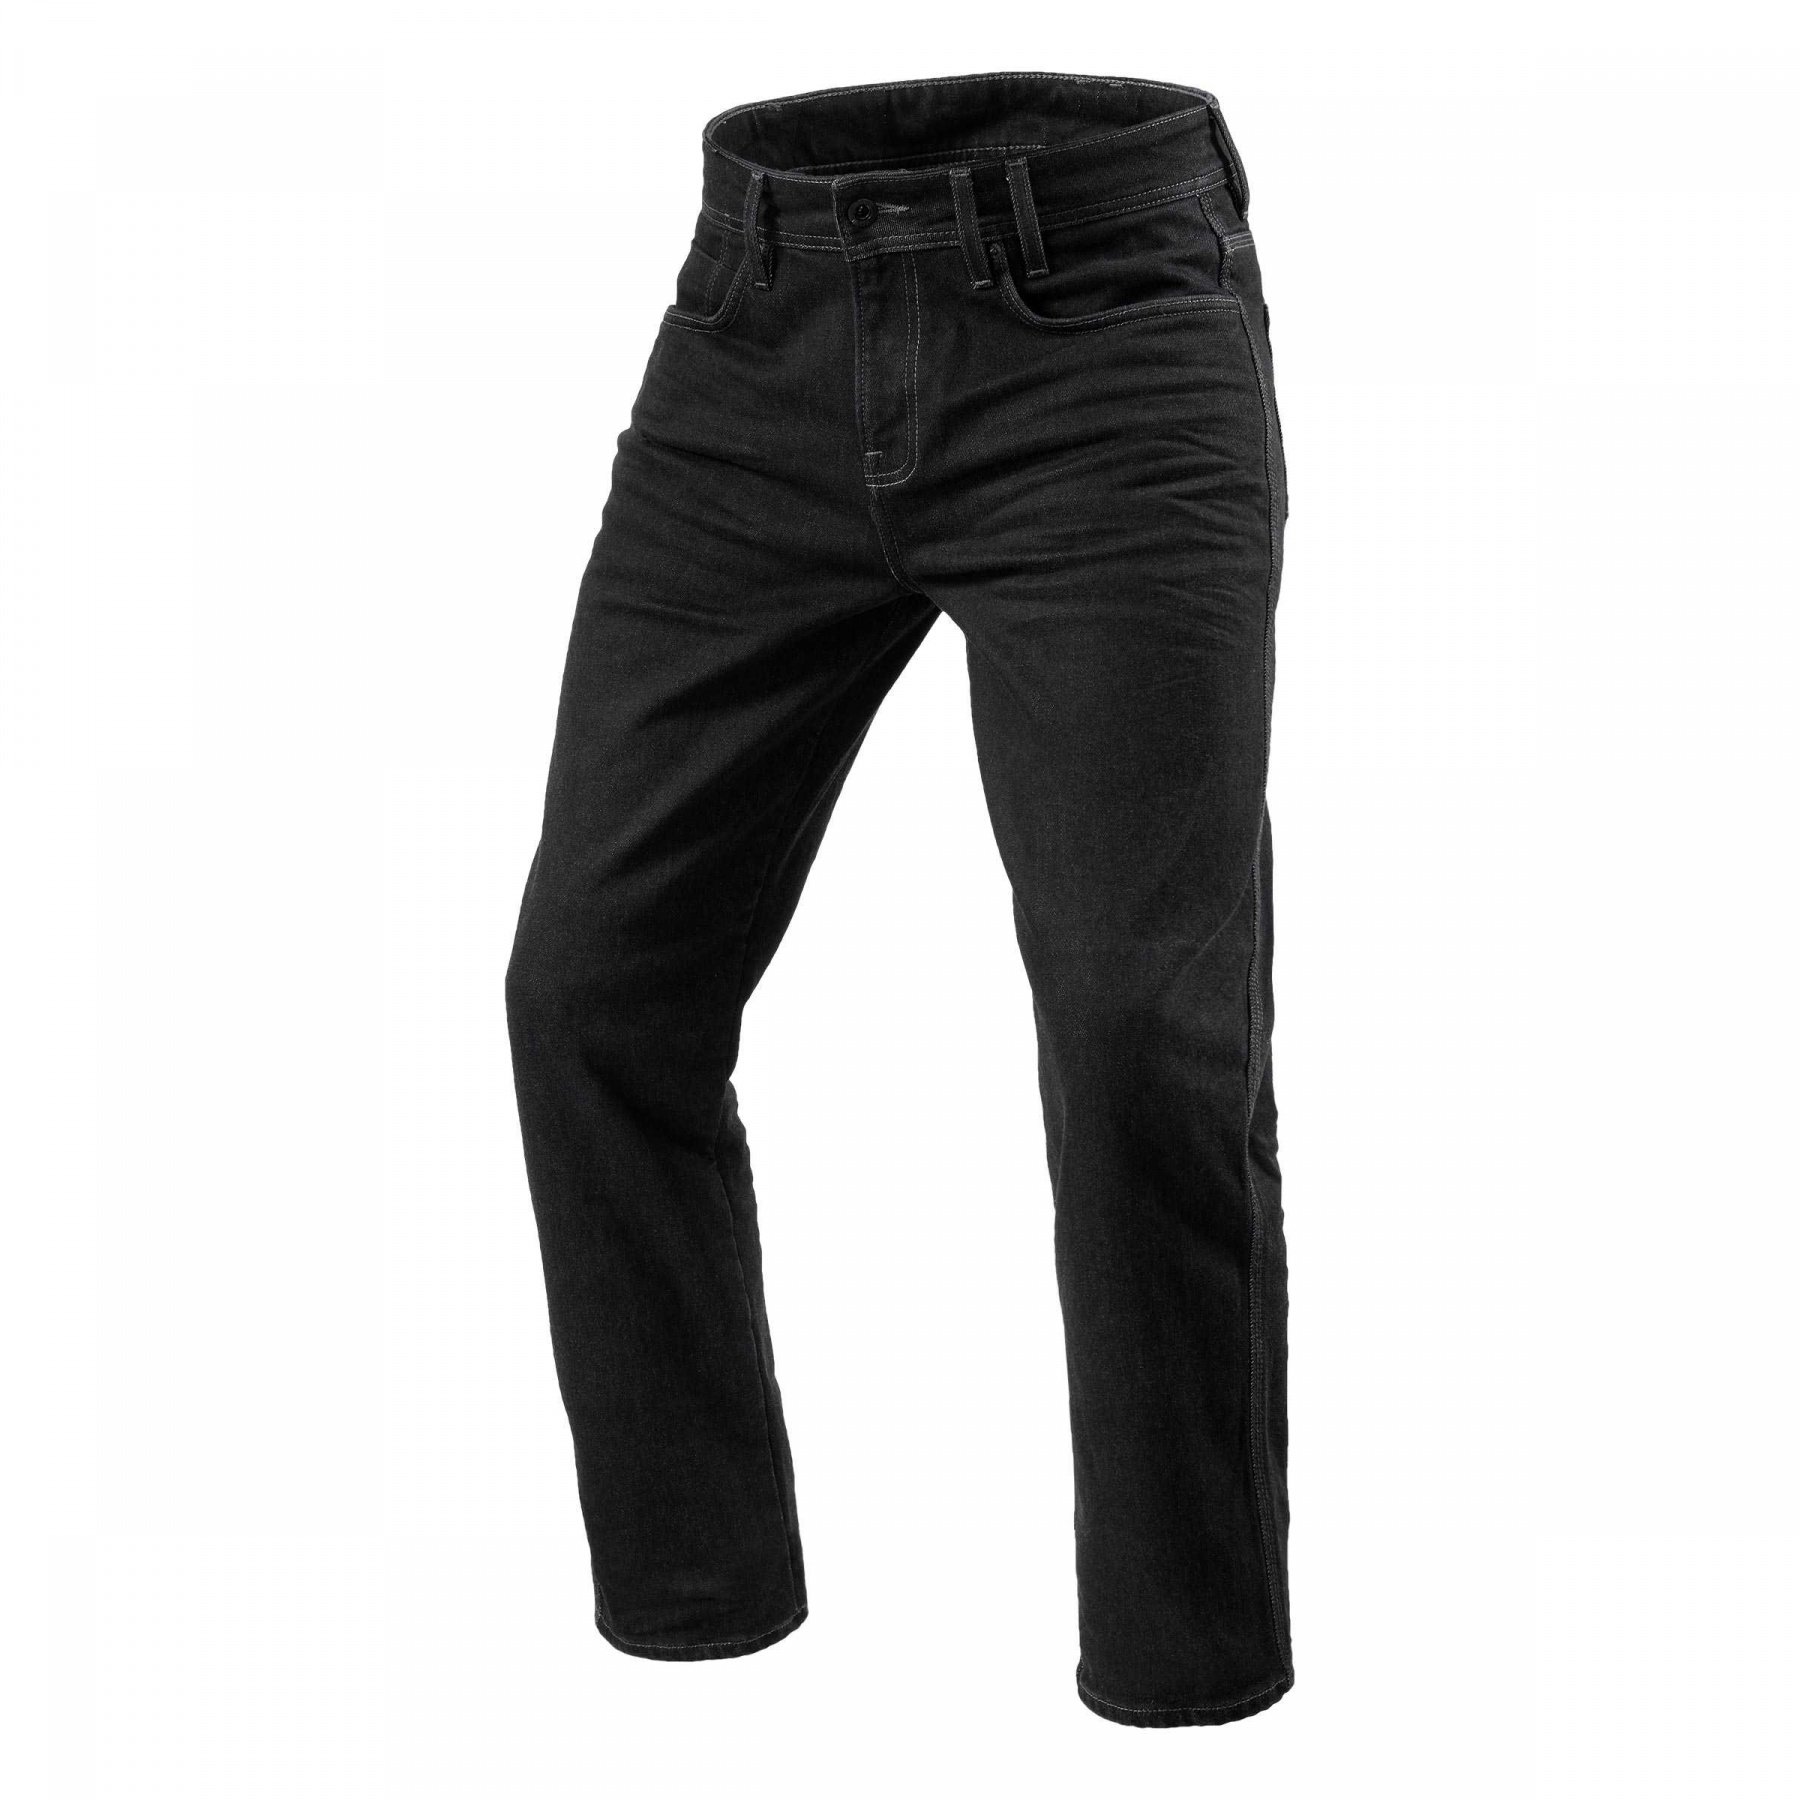 Image of REV'IT! Jeans Lombard 3 RF Dark Blue Used Motorcycle Jeans Size L34/W28 ID 8700001338219